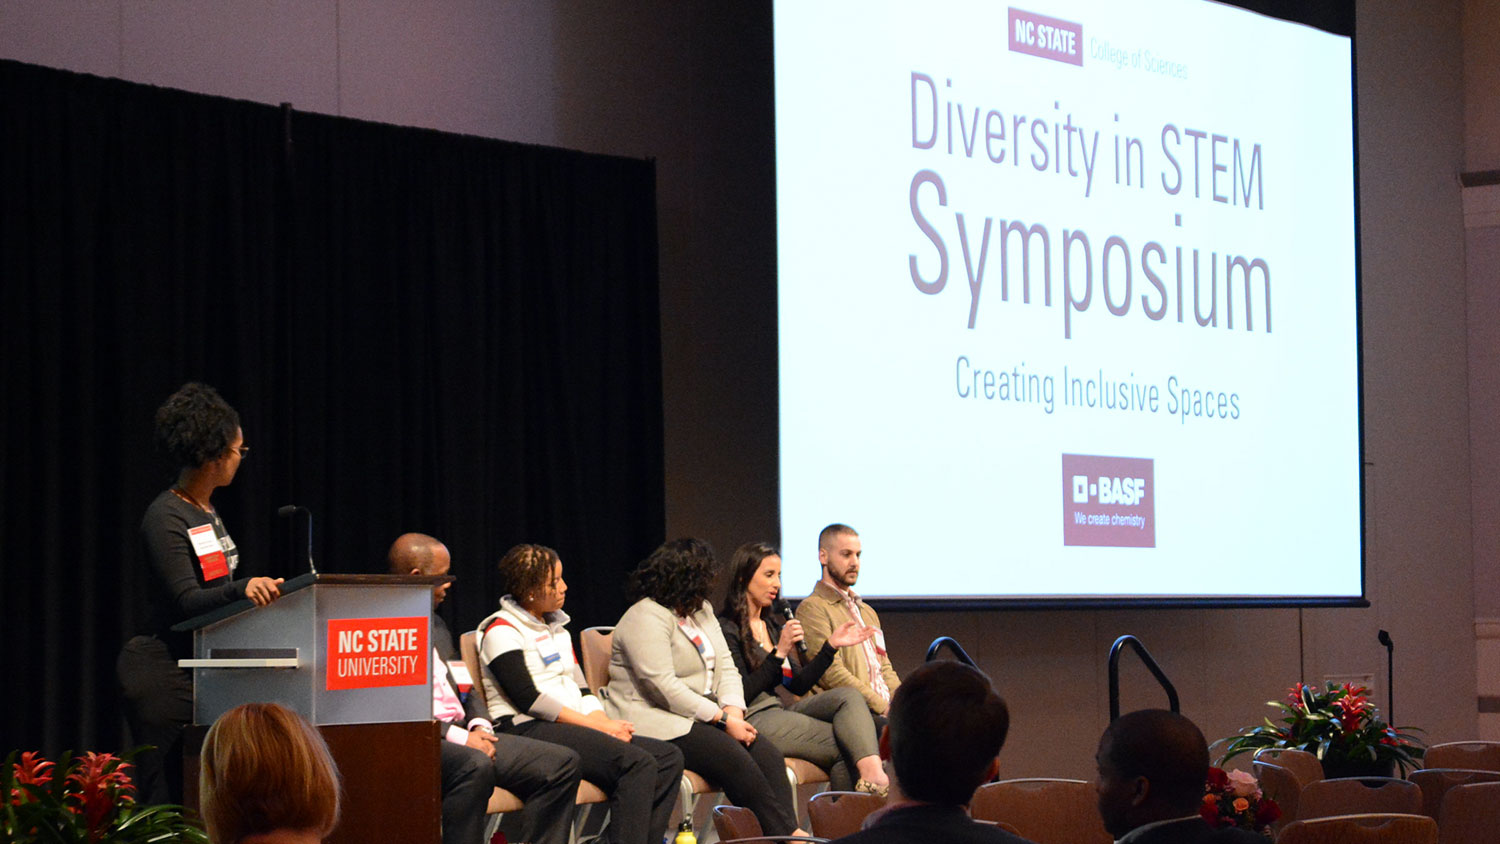 Panelists on stage at the 2nd annual Diversity in STEM Symposium